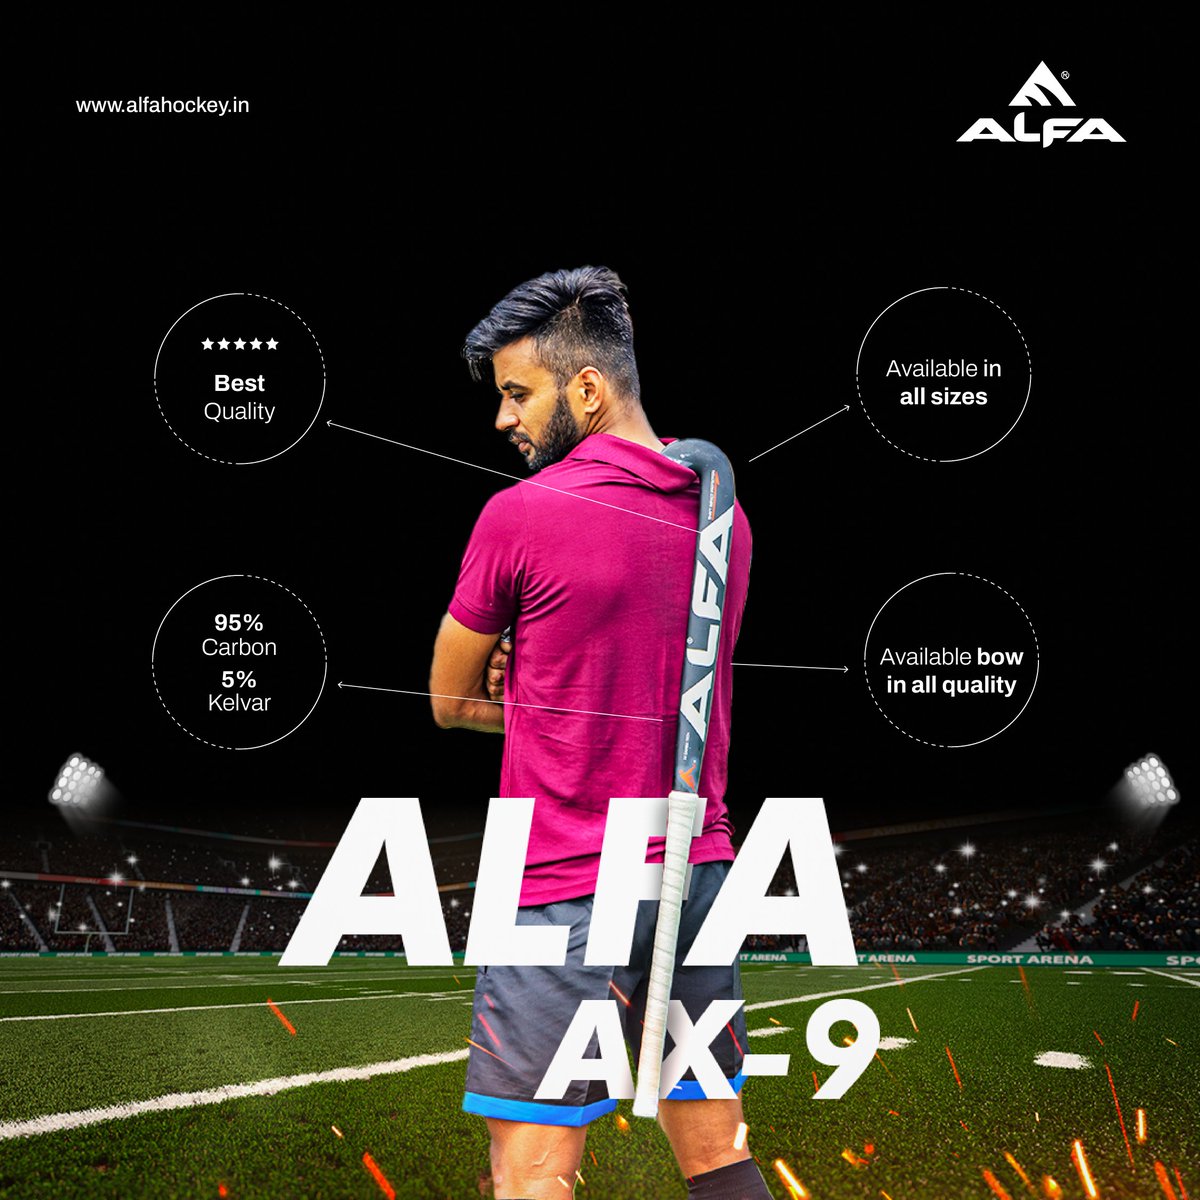 Manpreet x Alfa AX - 9 🤝 Alfa AX - 9 is amongst the very best senior composite hockey sticks and is the proud choice of Indian National Team Hockey Superstar Manpreet Singh! 🏑 Powered by extraordinary features, the Alfa AX-9 is designed to bring the best out of top athletes.